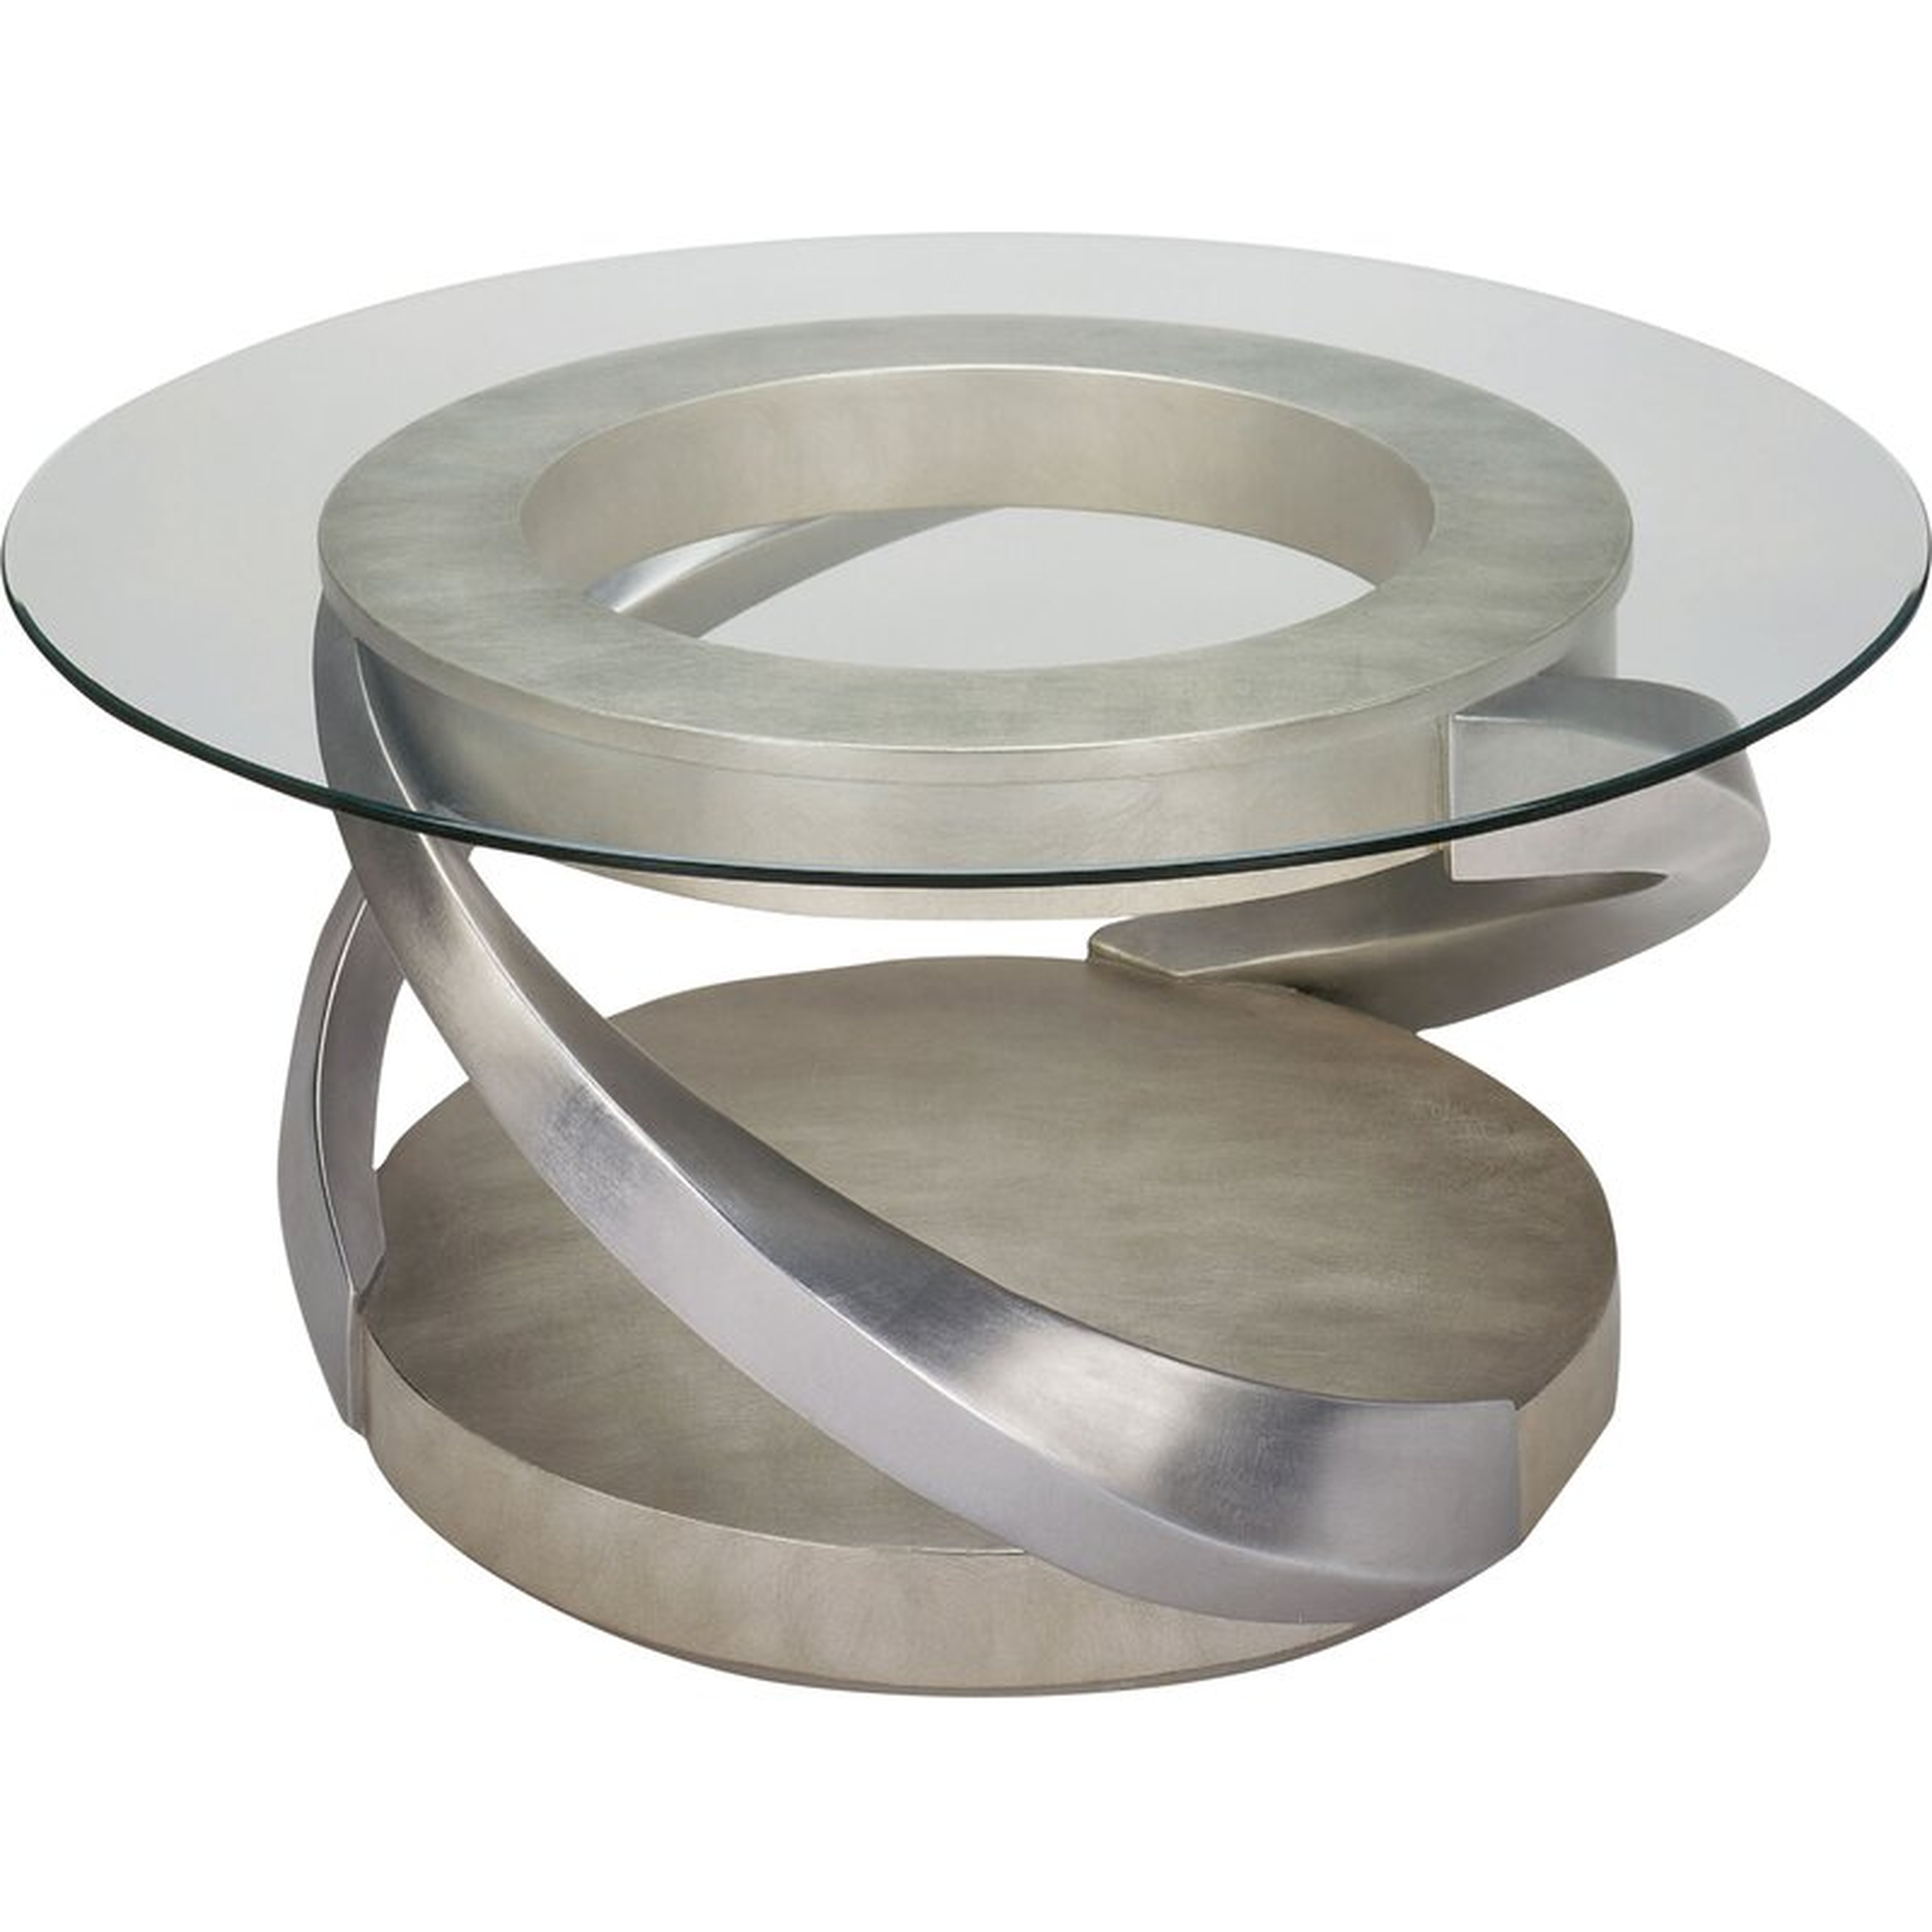 Artmax Abstract Coffee Table with Storage - Perigold